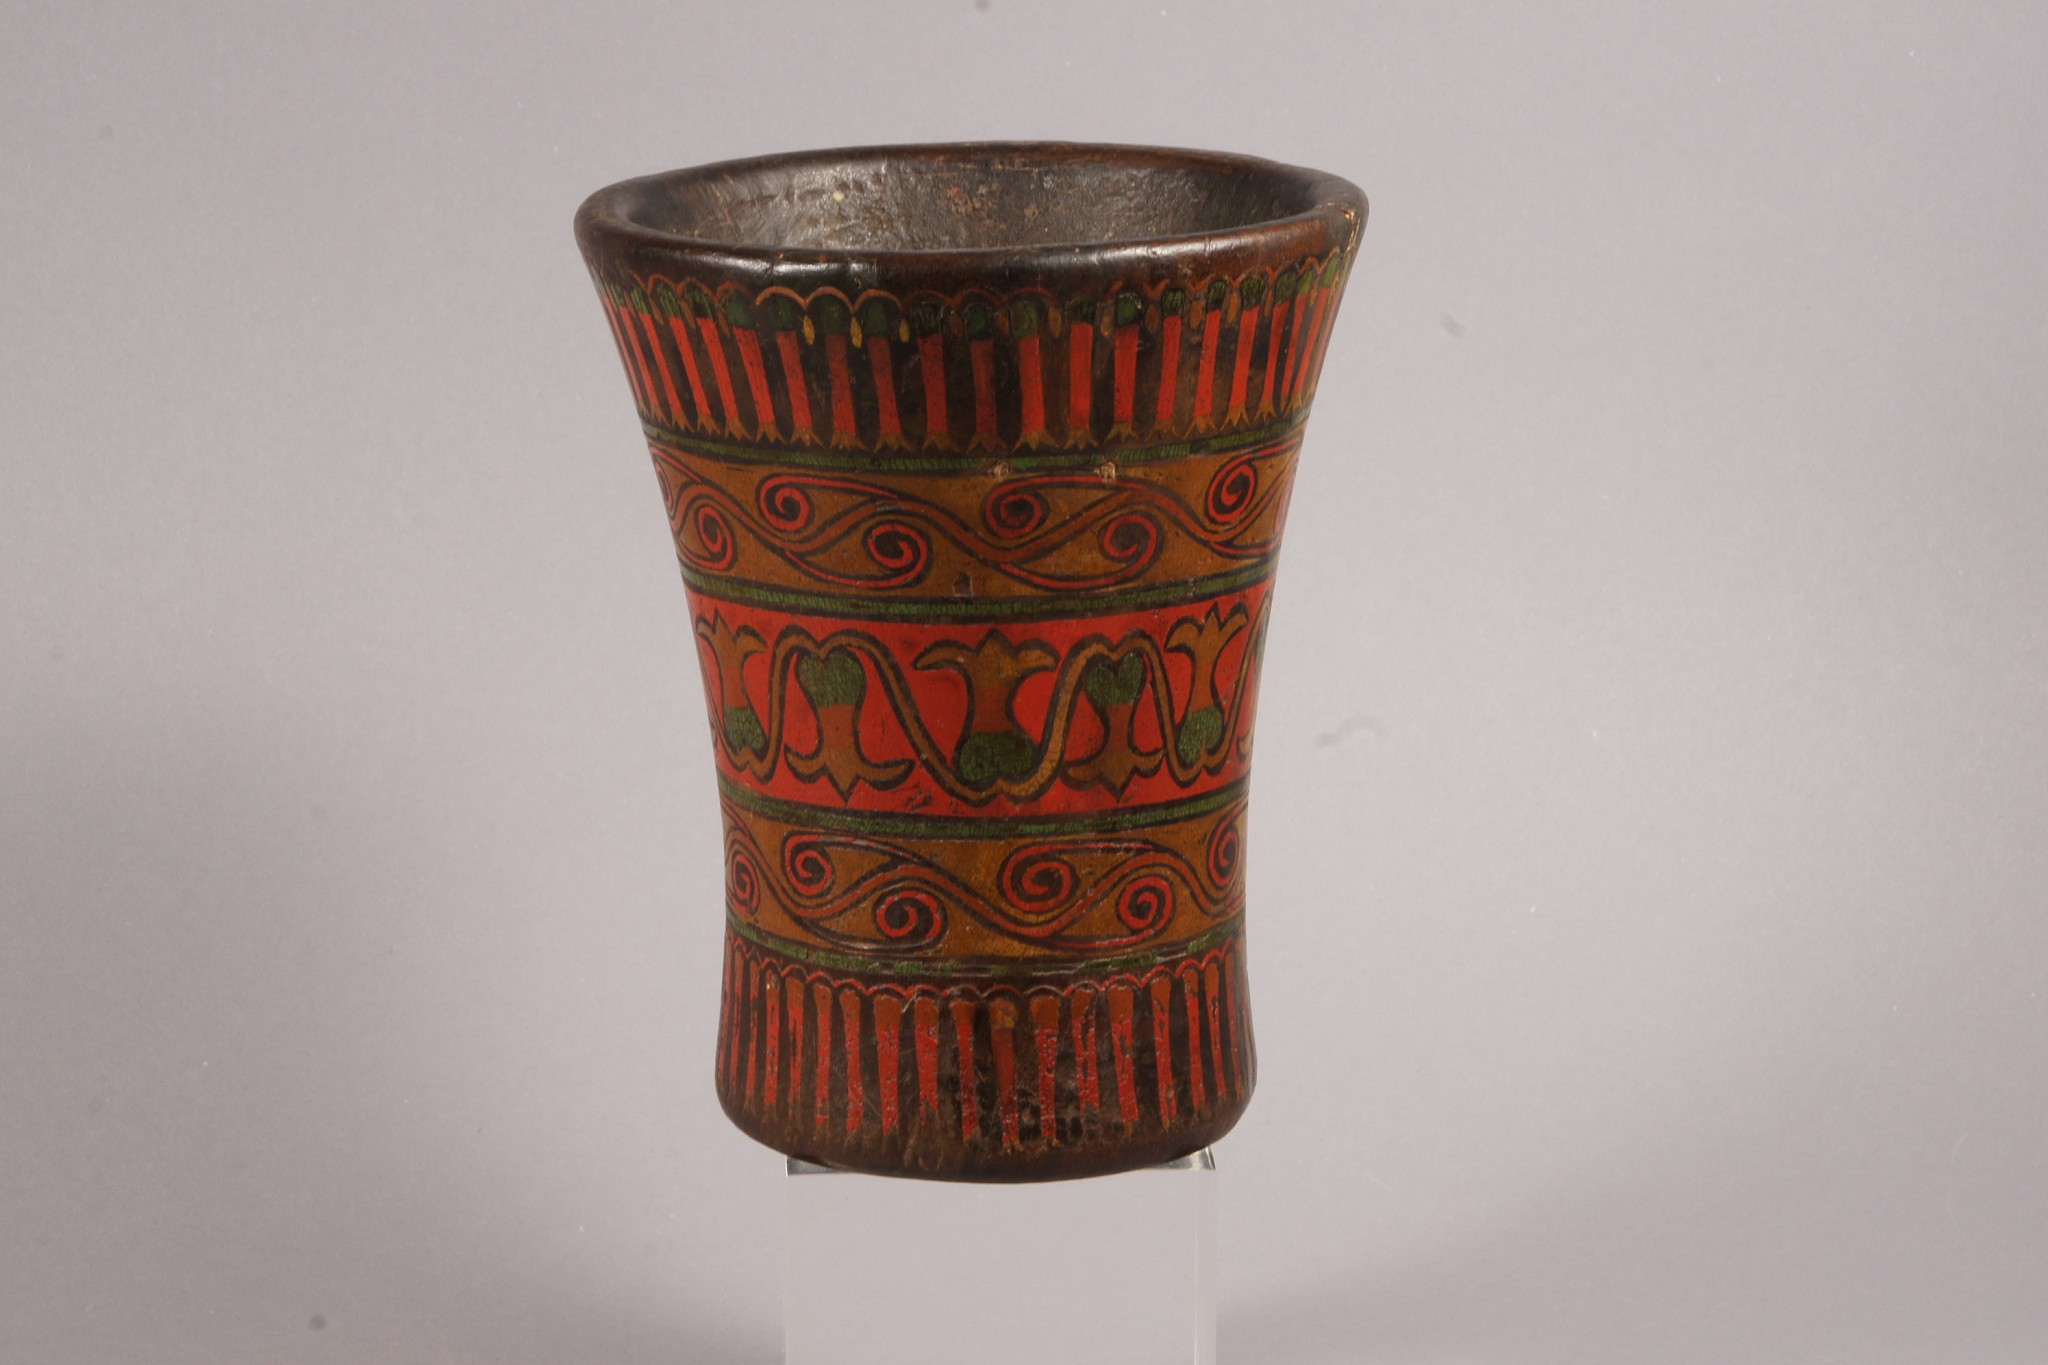 Peru, Colonial Qero with floral motifs in registers
Decorated in five registers with flowers, the pair to this vessel is in the Museo Inka, Universadid Nacional del Cuzco and illustrated in Ochoa et. al. "Qeros: Arte Inka en vasos ceremoniales" (1998: 267). Some were made in pairs, particularly in the Colonial period. Qeros were festive drinking cups that Inca rulers, governors and other state officials used in ceremonies, and they were often gifted from one lord to another. Hans Monheim collection - Aachen Germany  since 1950's.
Media: Wood
Dimensions: Height  6 1/2: x Width: 5 " across the top
Price Upon Request
M4044